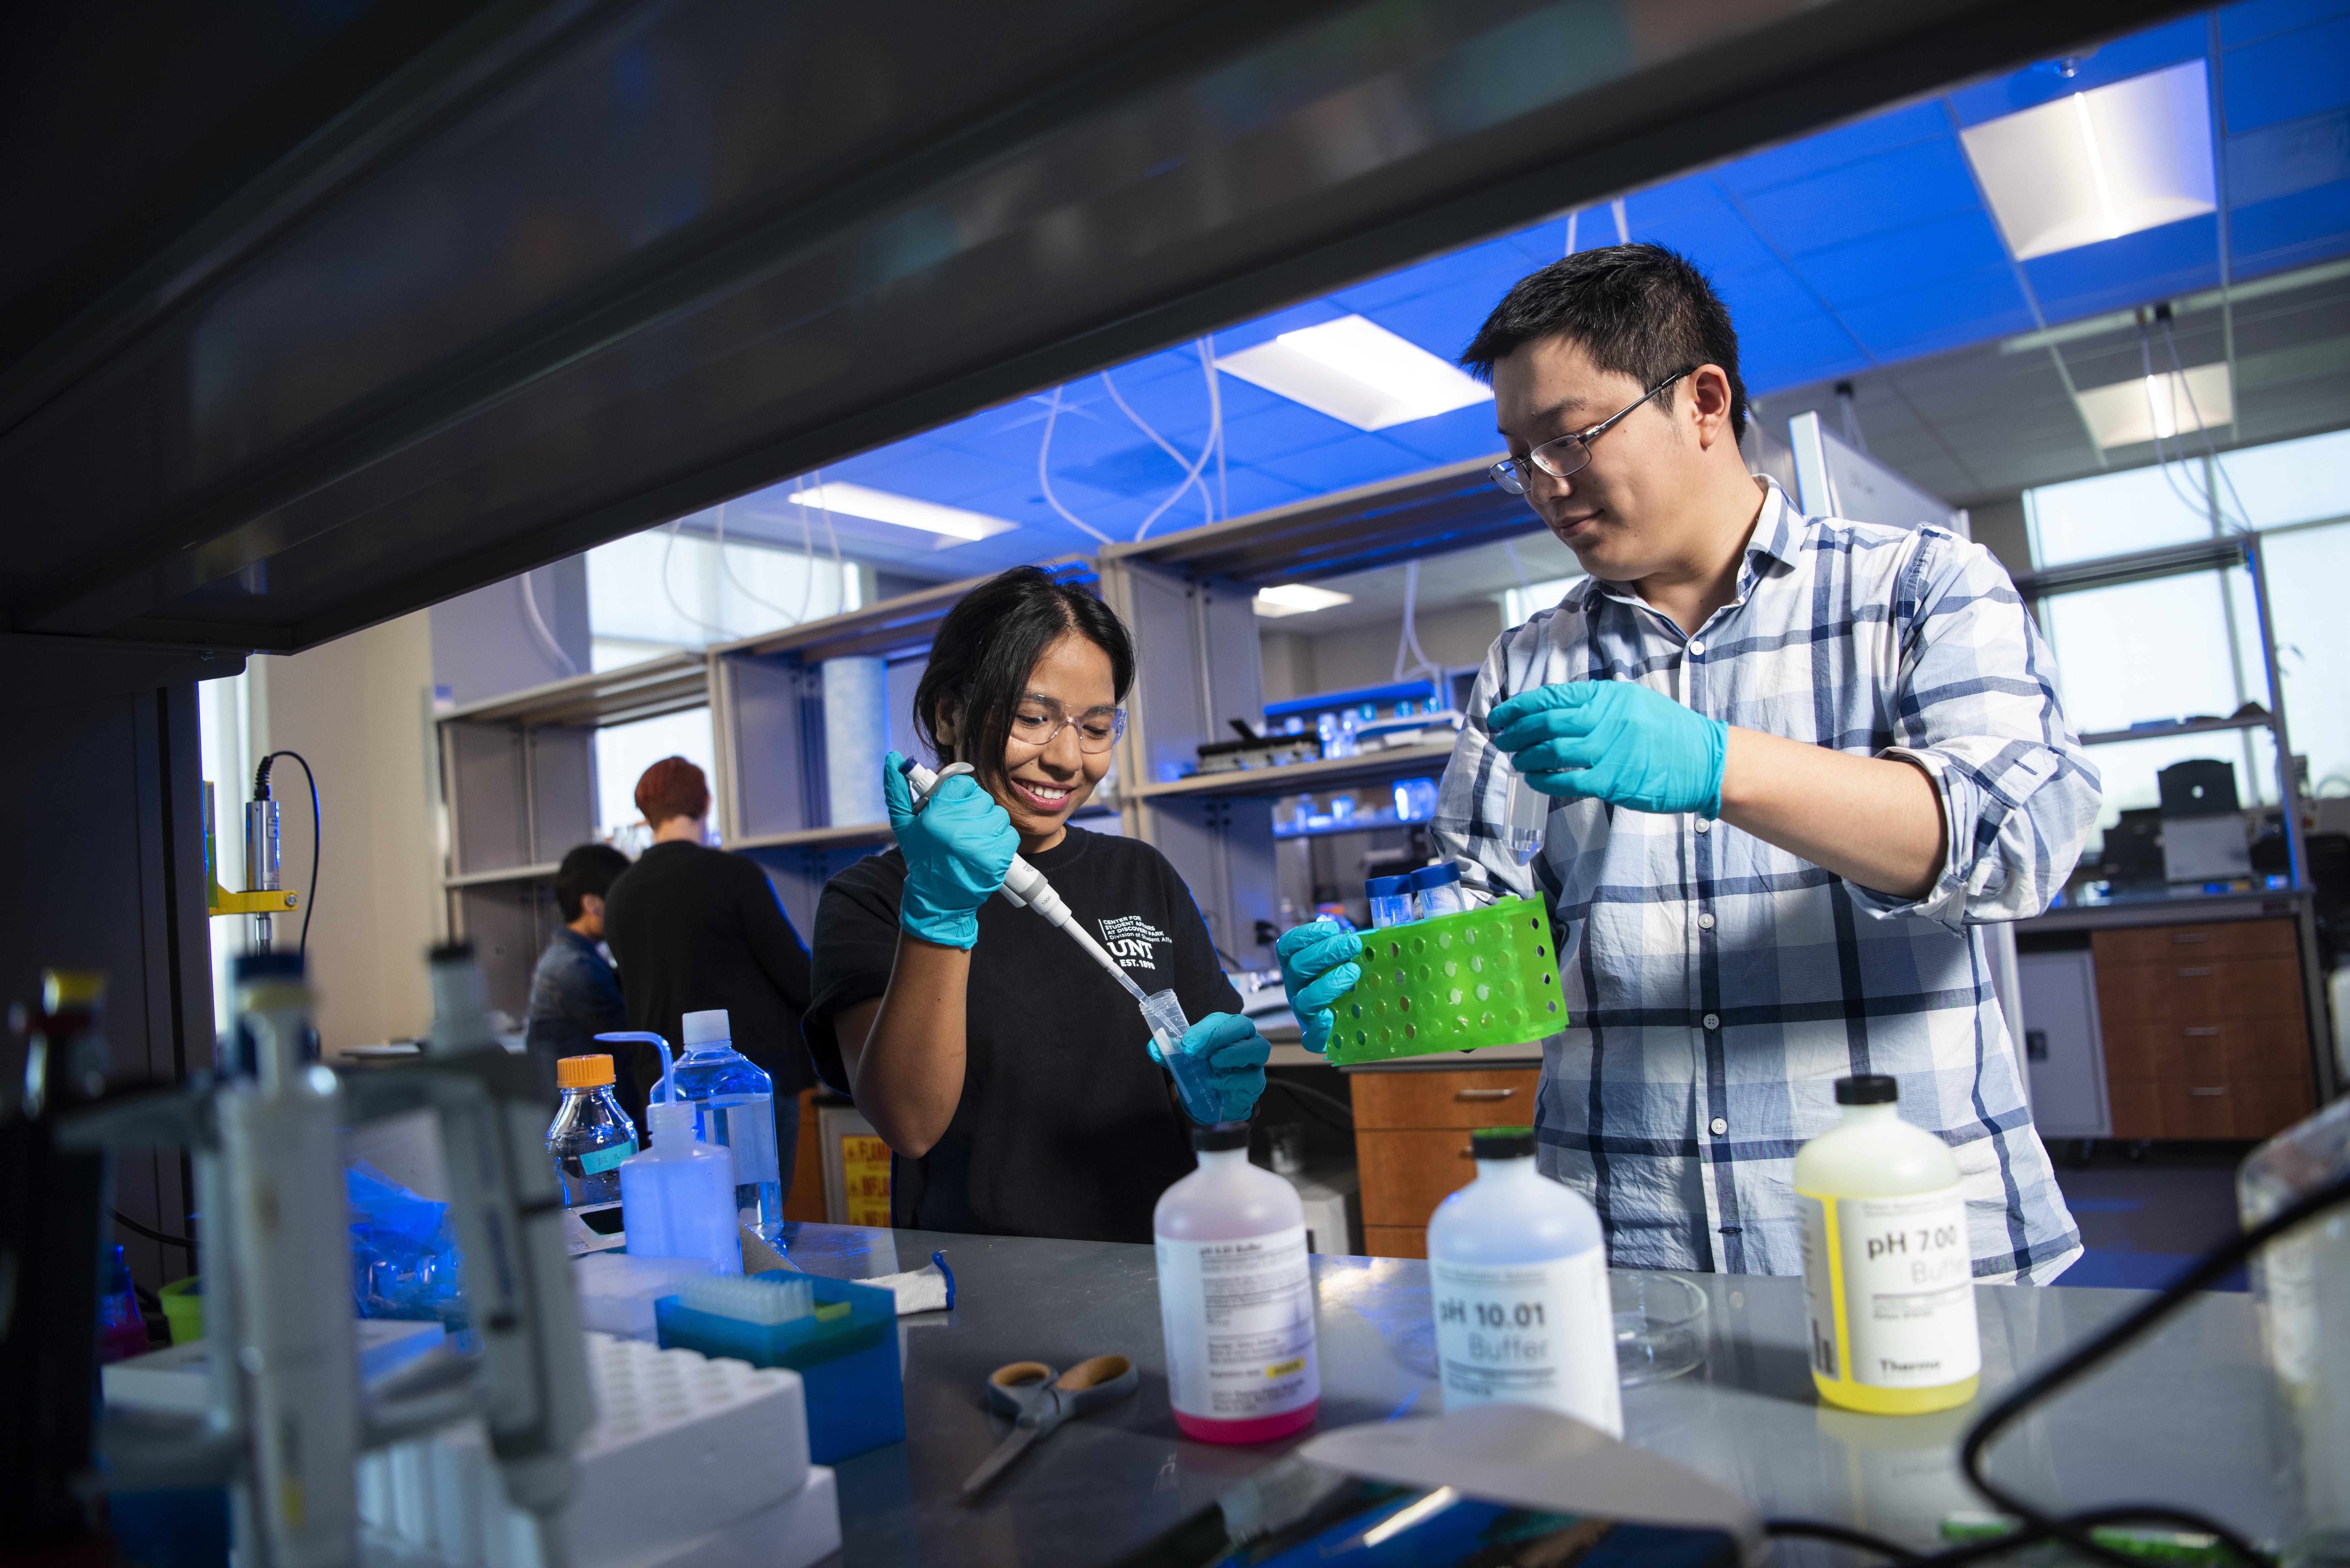 Inside research labs, faculty investigate exoskeleton technology that may someday help people with limited mobility; develop nanotechnology and optics to diagnose cancer; and biopolymers and flexible bioelectronics that may help doctors deliver medications and manage illnesses. 